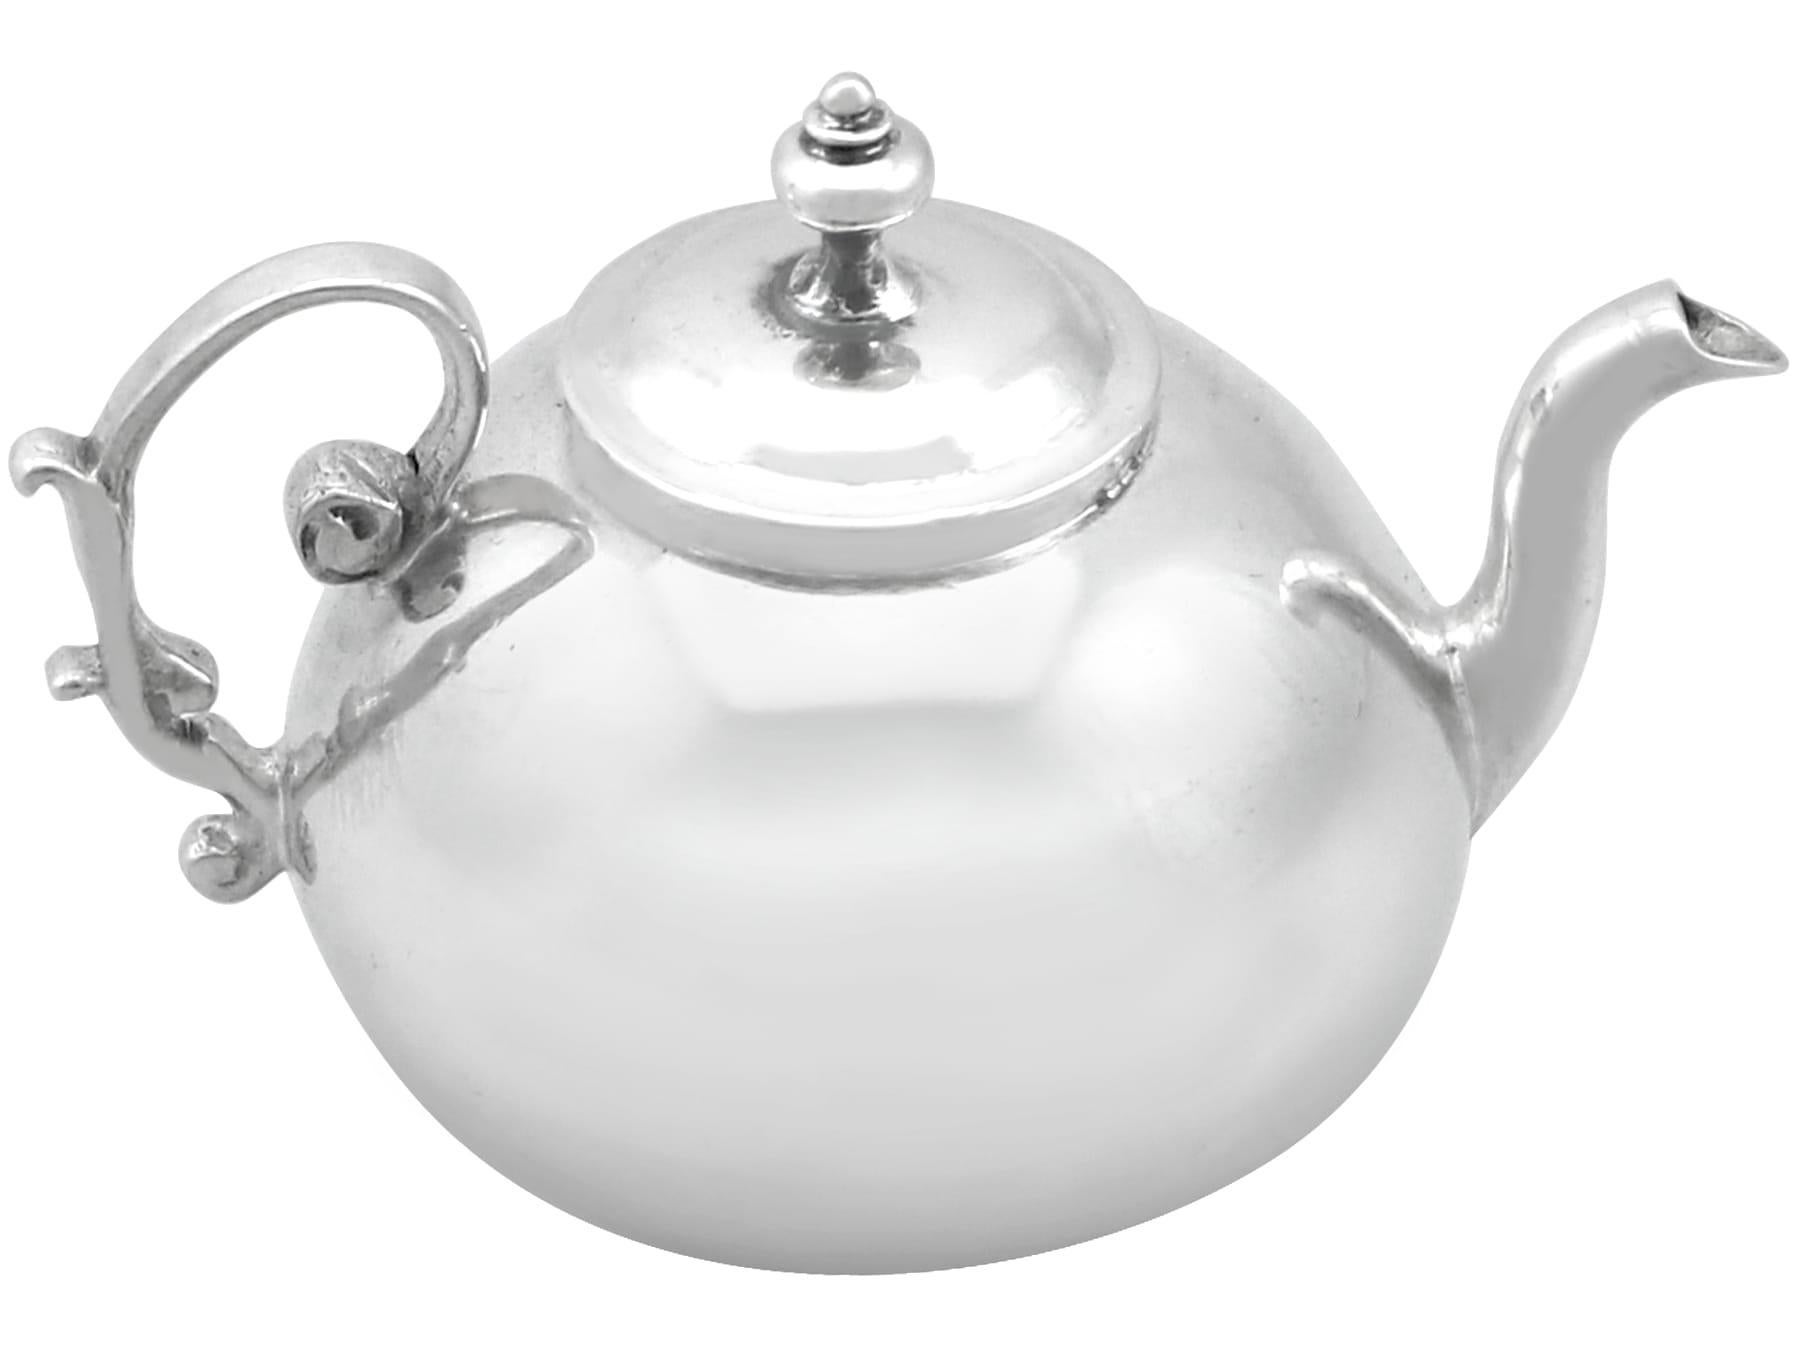 Antique 1700s Silver Miniature Teapot  In Excellent Condition For Sale In Jesmond, Newcastle Upon Tyne